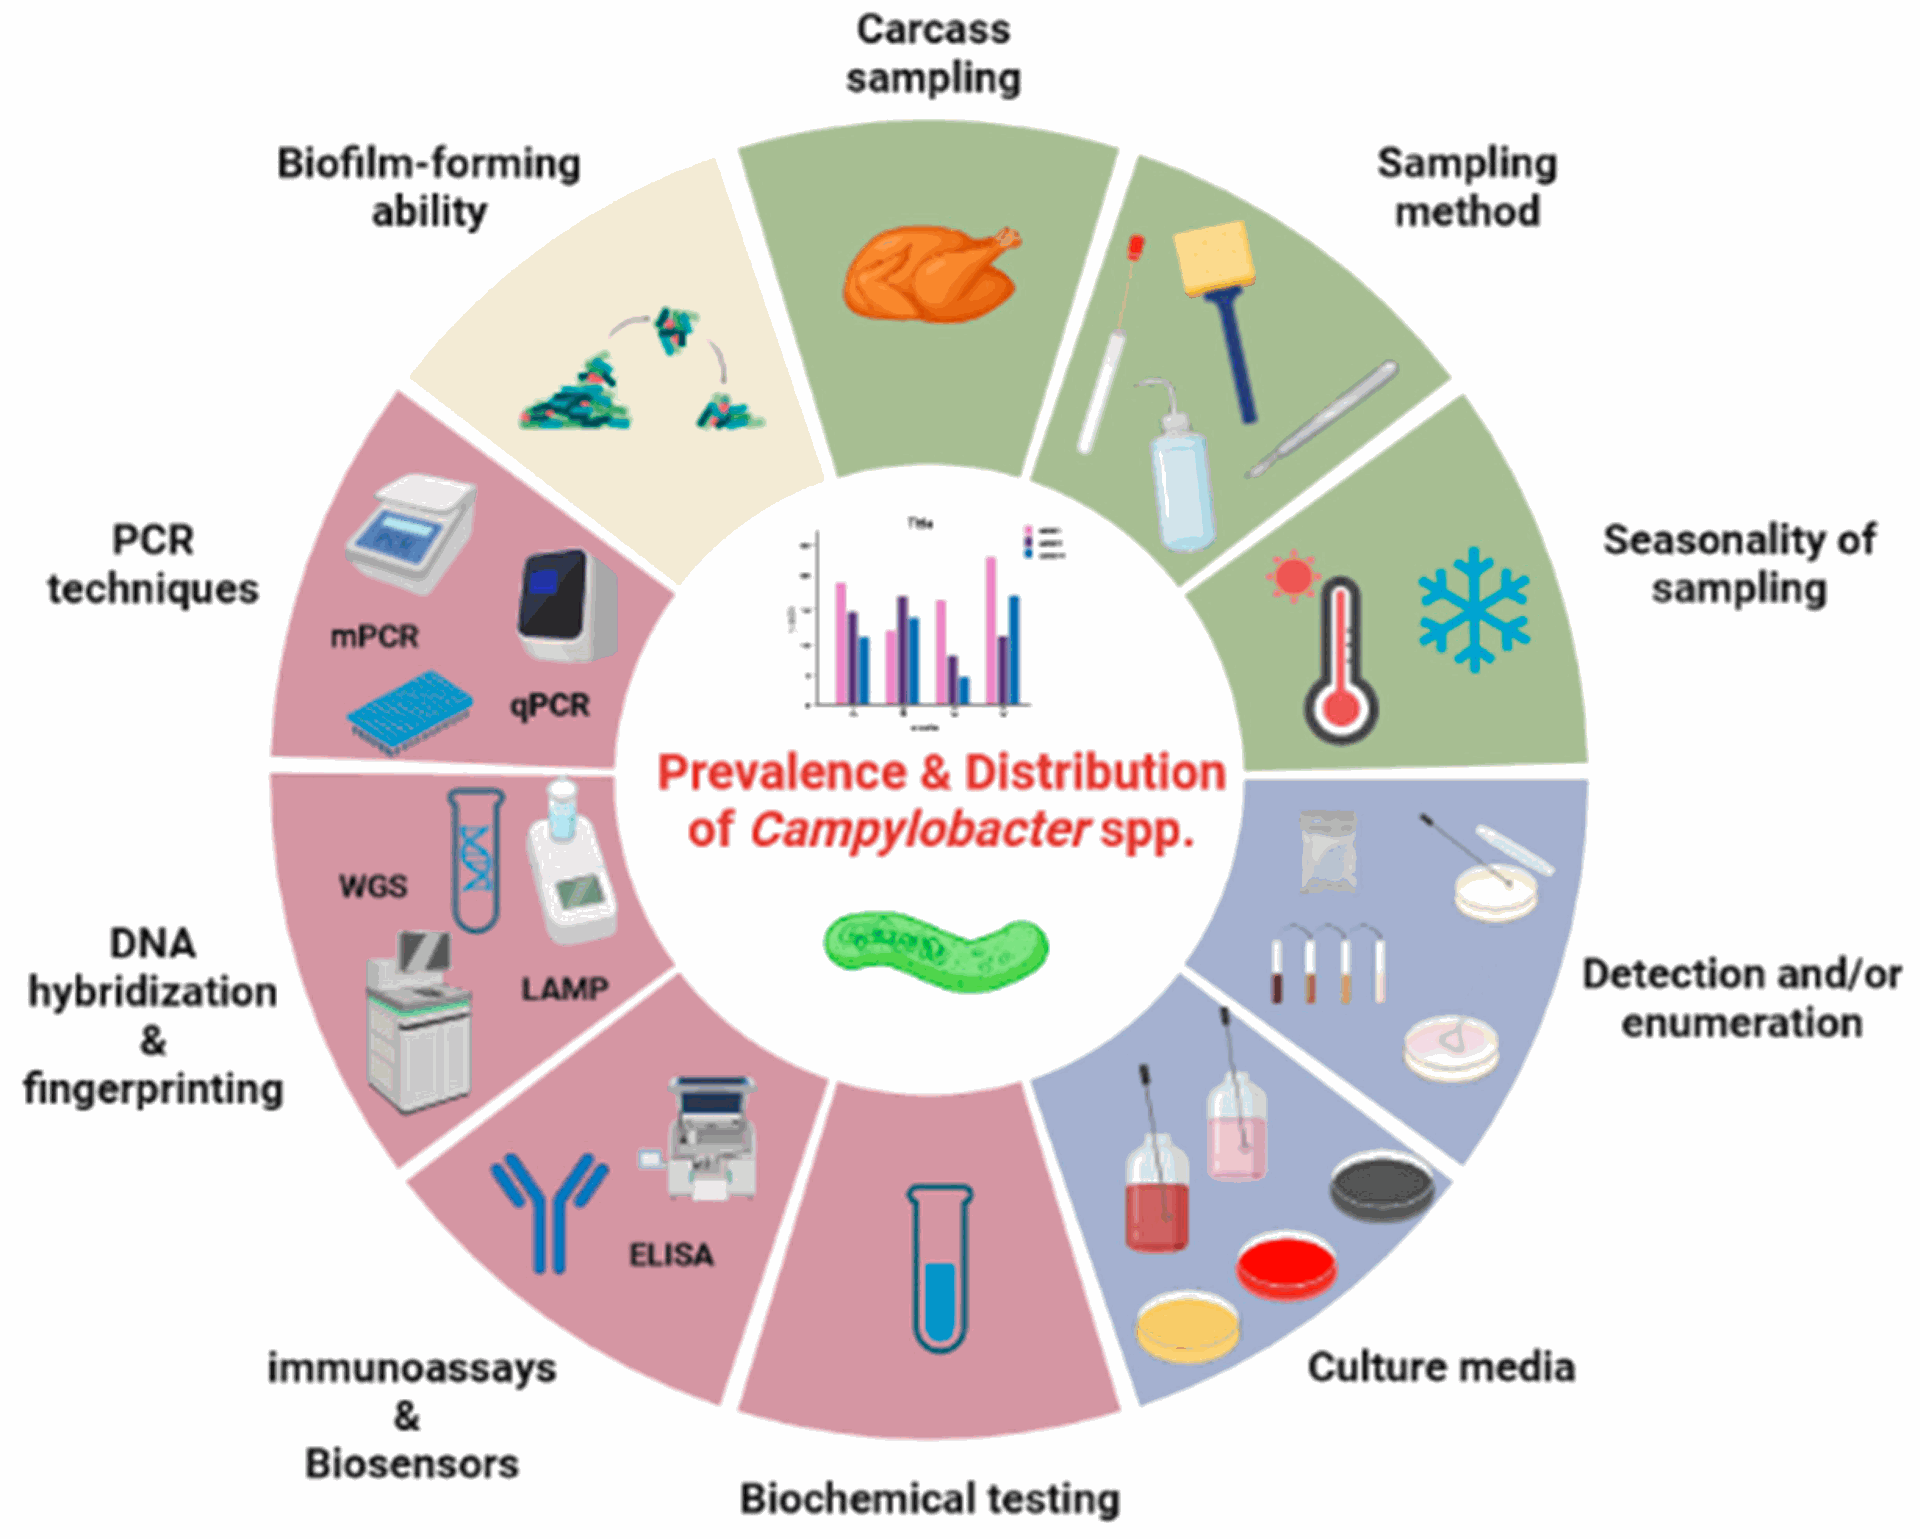 Factors affecting the prevalence and distribution of Campylobacter spp. in poultry meat. Factors that are related to each other are grouped together under the same color. As a result, distinct groups of factors referring to sampling (light green), isolation procedure (light blue), confirmation and/or identification (light purple), and biofilm production (light brown) for Campylobacter species are presented. Created with BioRender.com.